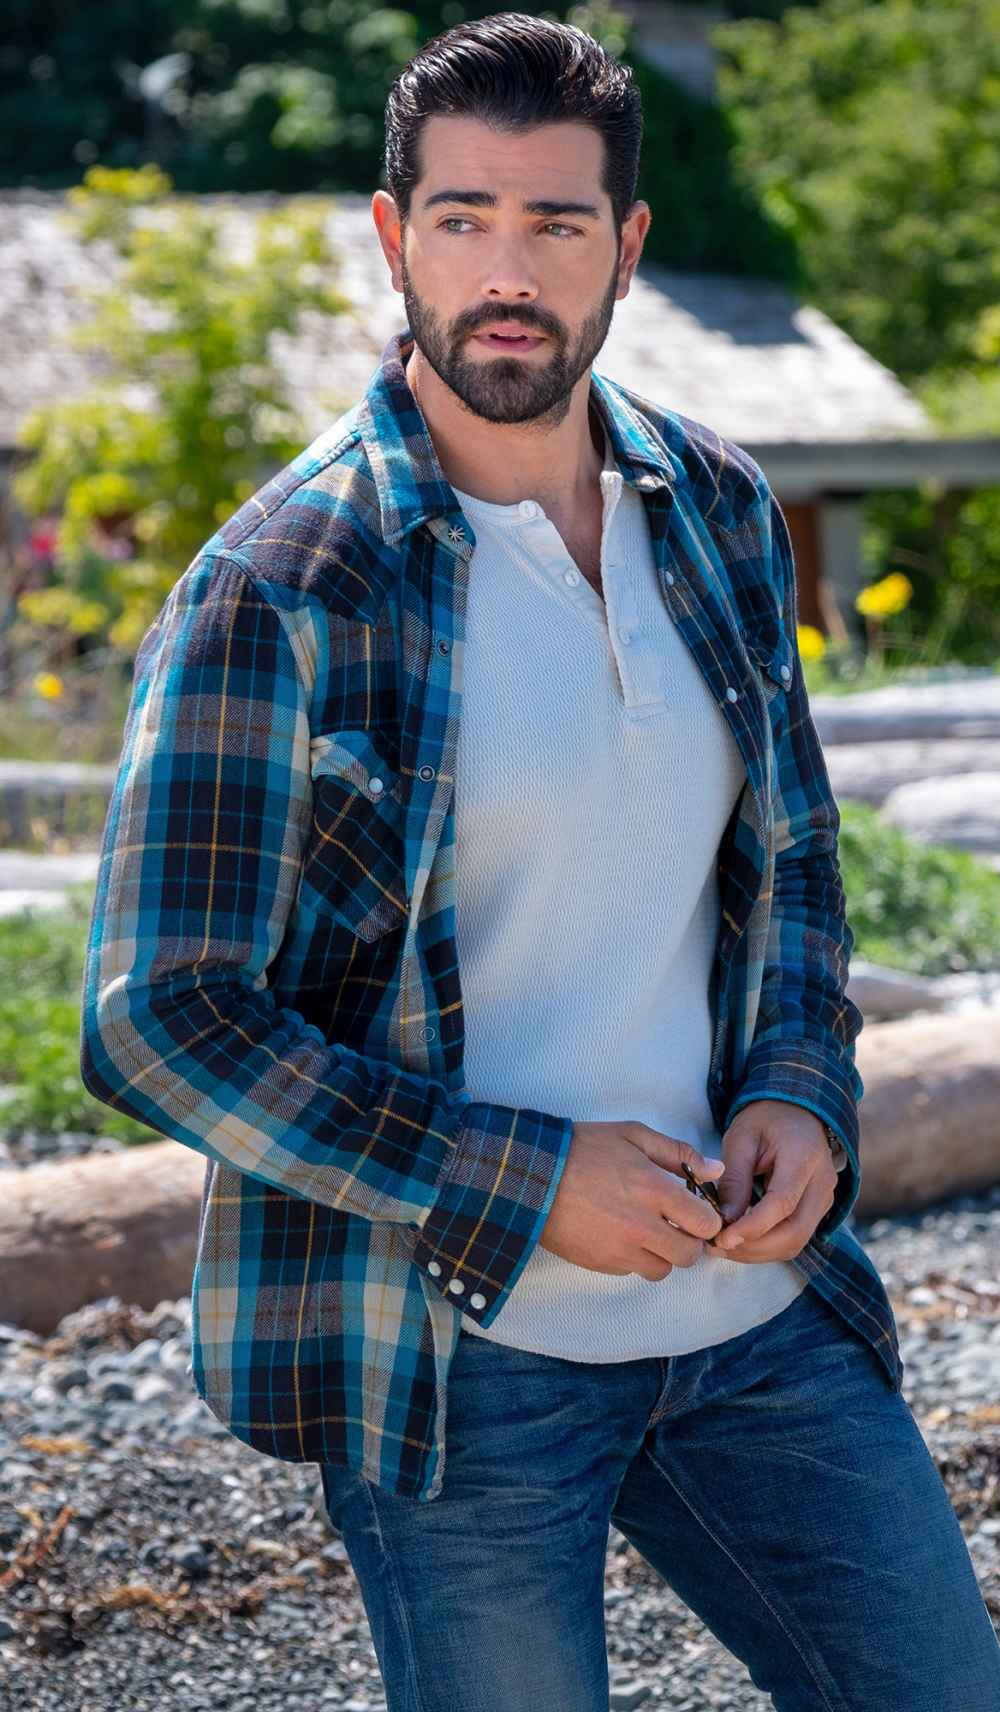 Jesse Metcalfe Exiting Hallmark Channel’s ‘Chesapeake Shores’ in Season 5 After Being ‘Taylor Made’ for the Role